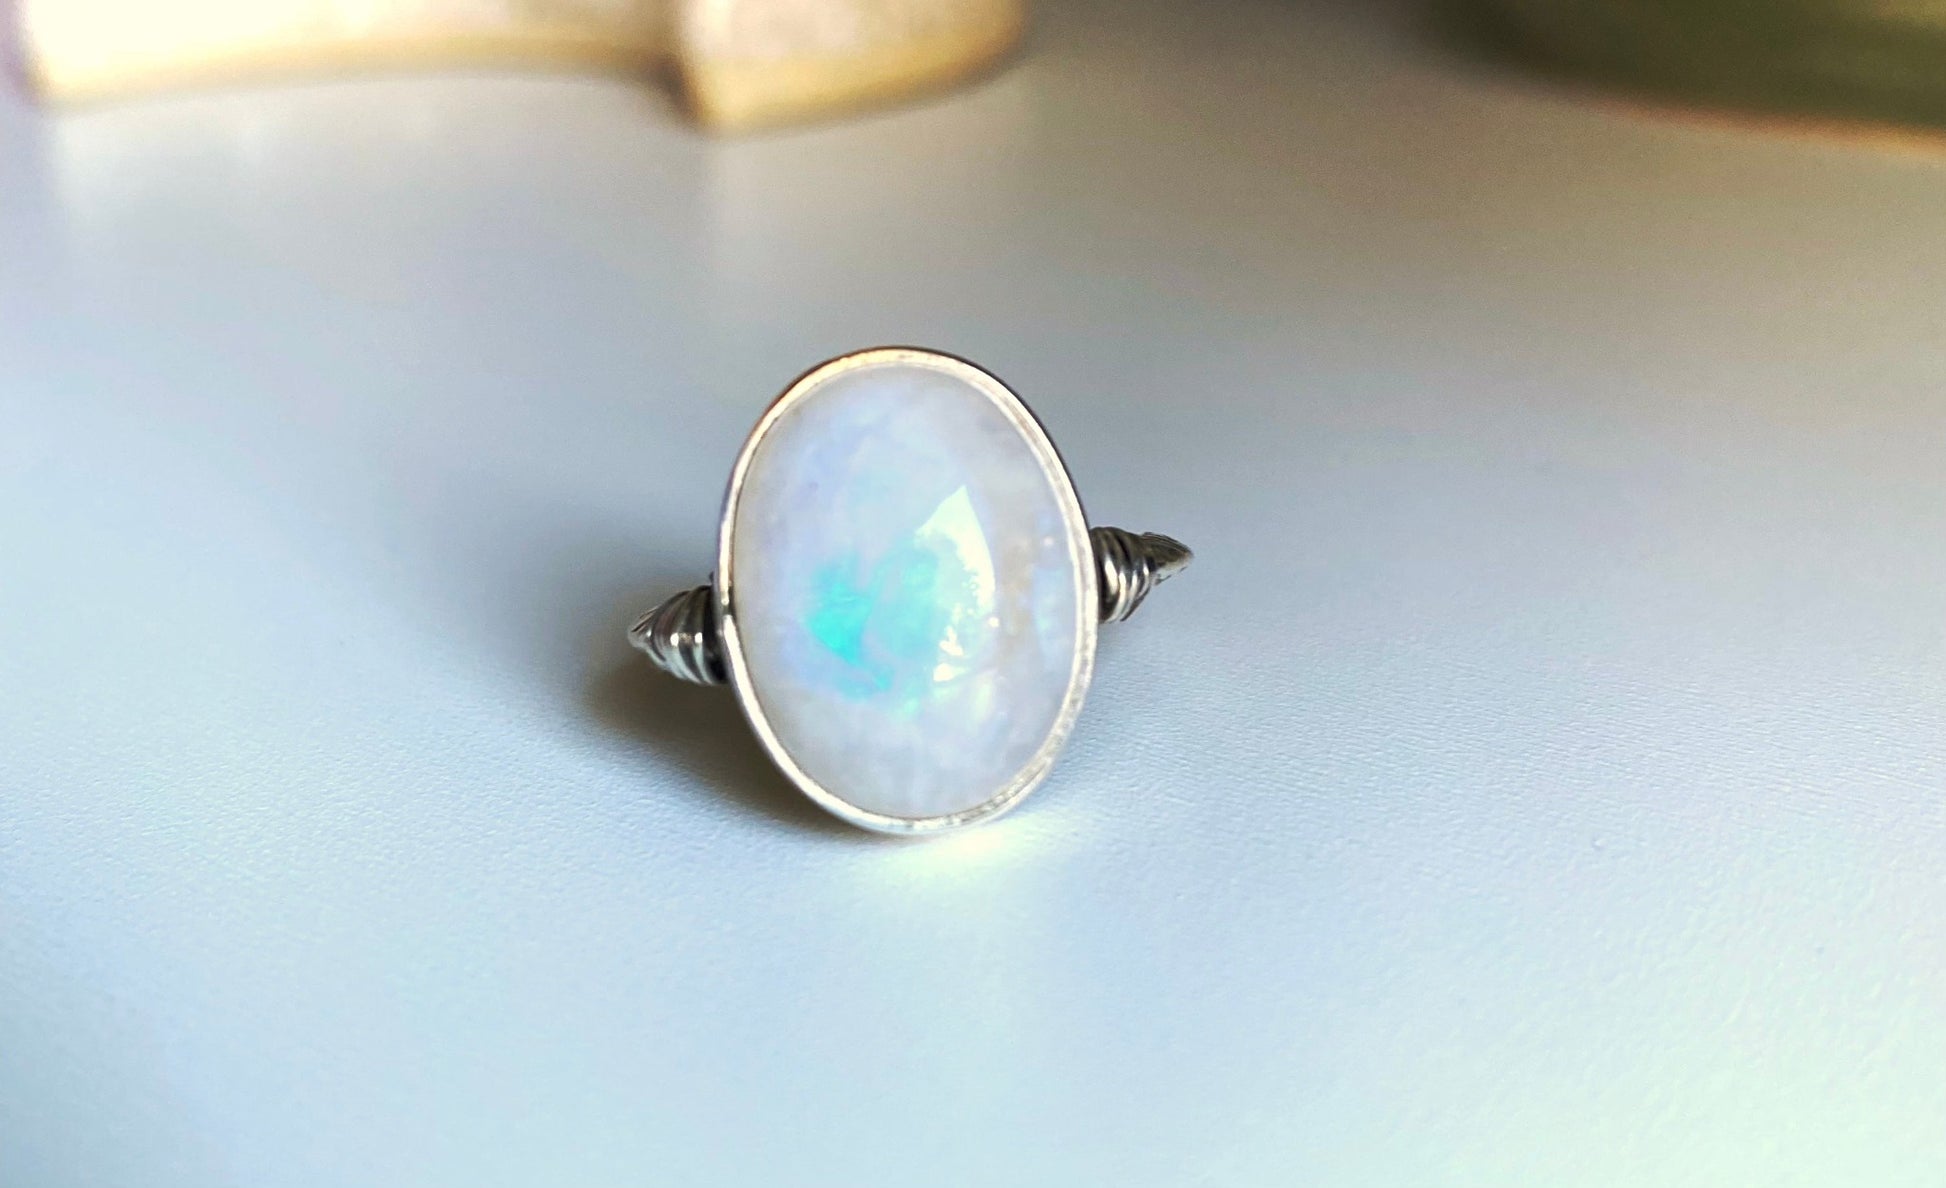 Large moonstone ring with scrollwork single band, left and right of the stone are small sterling silver wire wrapped accents. The moonstone itself has a gorgeous blue flash when the stone is met with direct sunlight. Surrounded by a simple bezel wall to protect the stone.